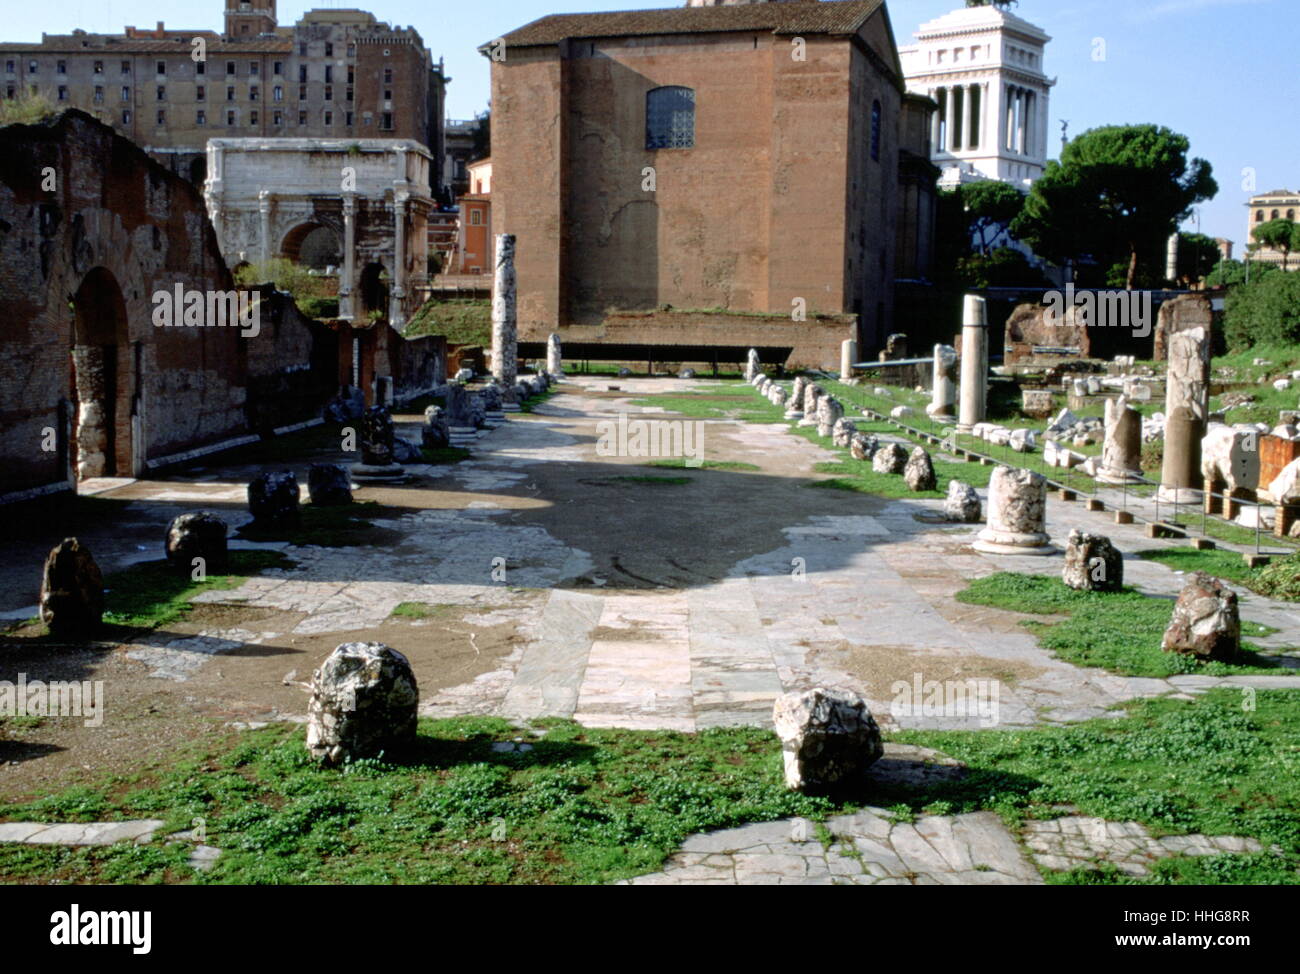 The Basilica Aemilia (Italian: Basilica Emilia) was a civil basilica in the Roman forum, in Rome, Italy. Today only the plan and some rebuilt elements can be seen. Stock Photo